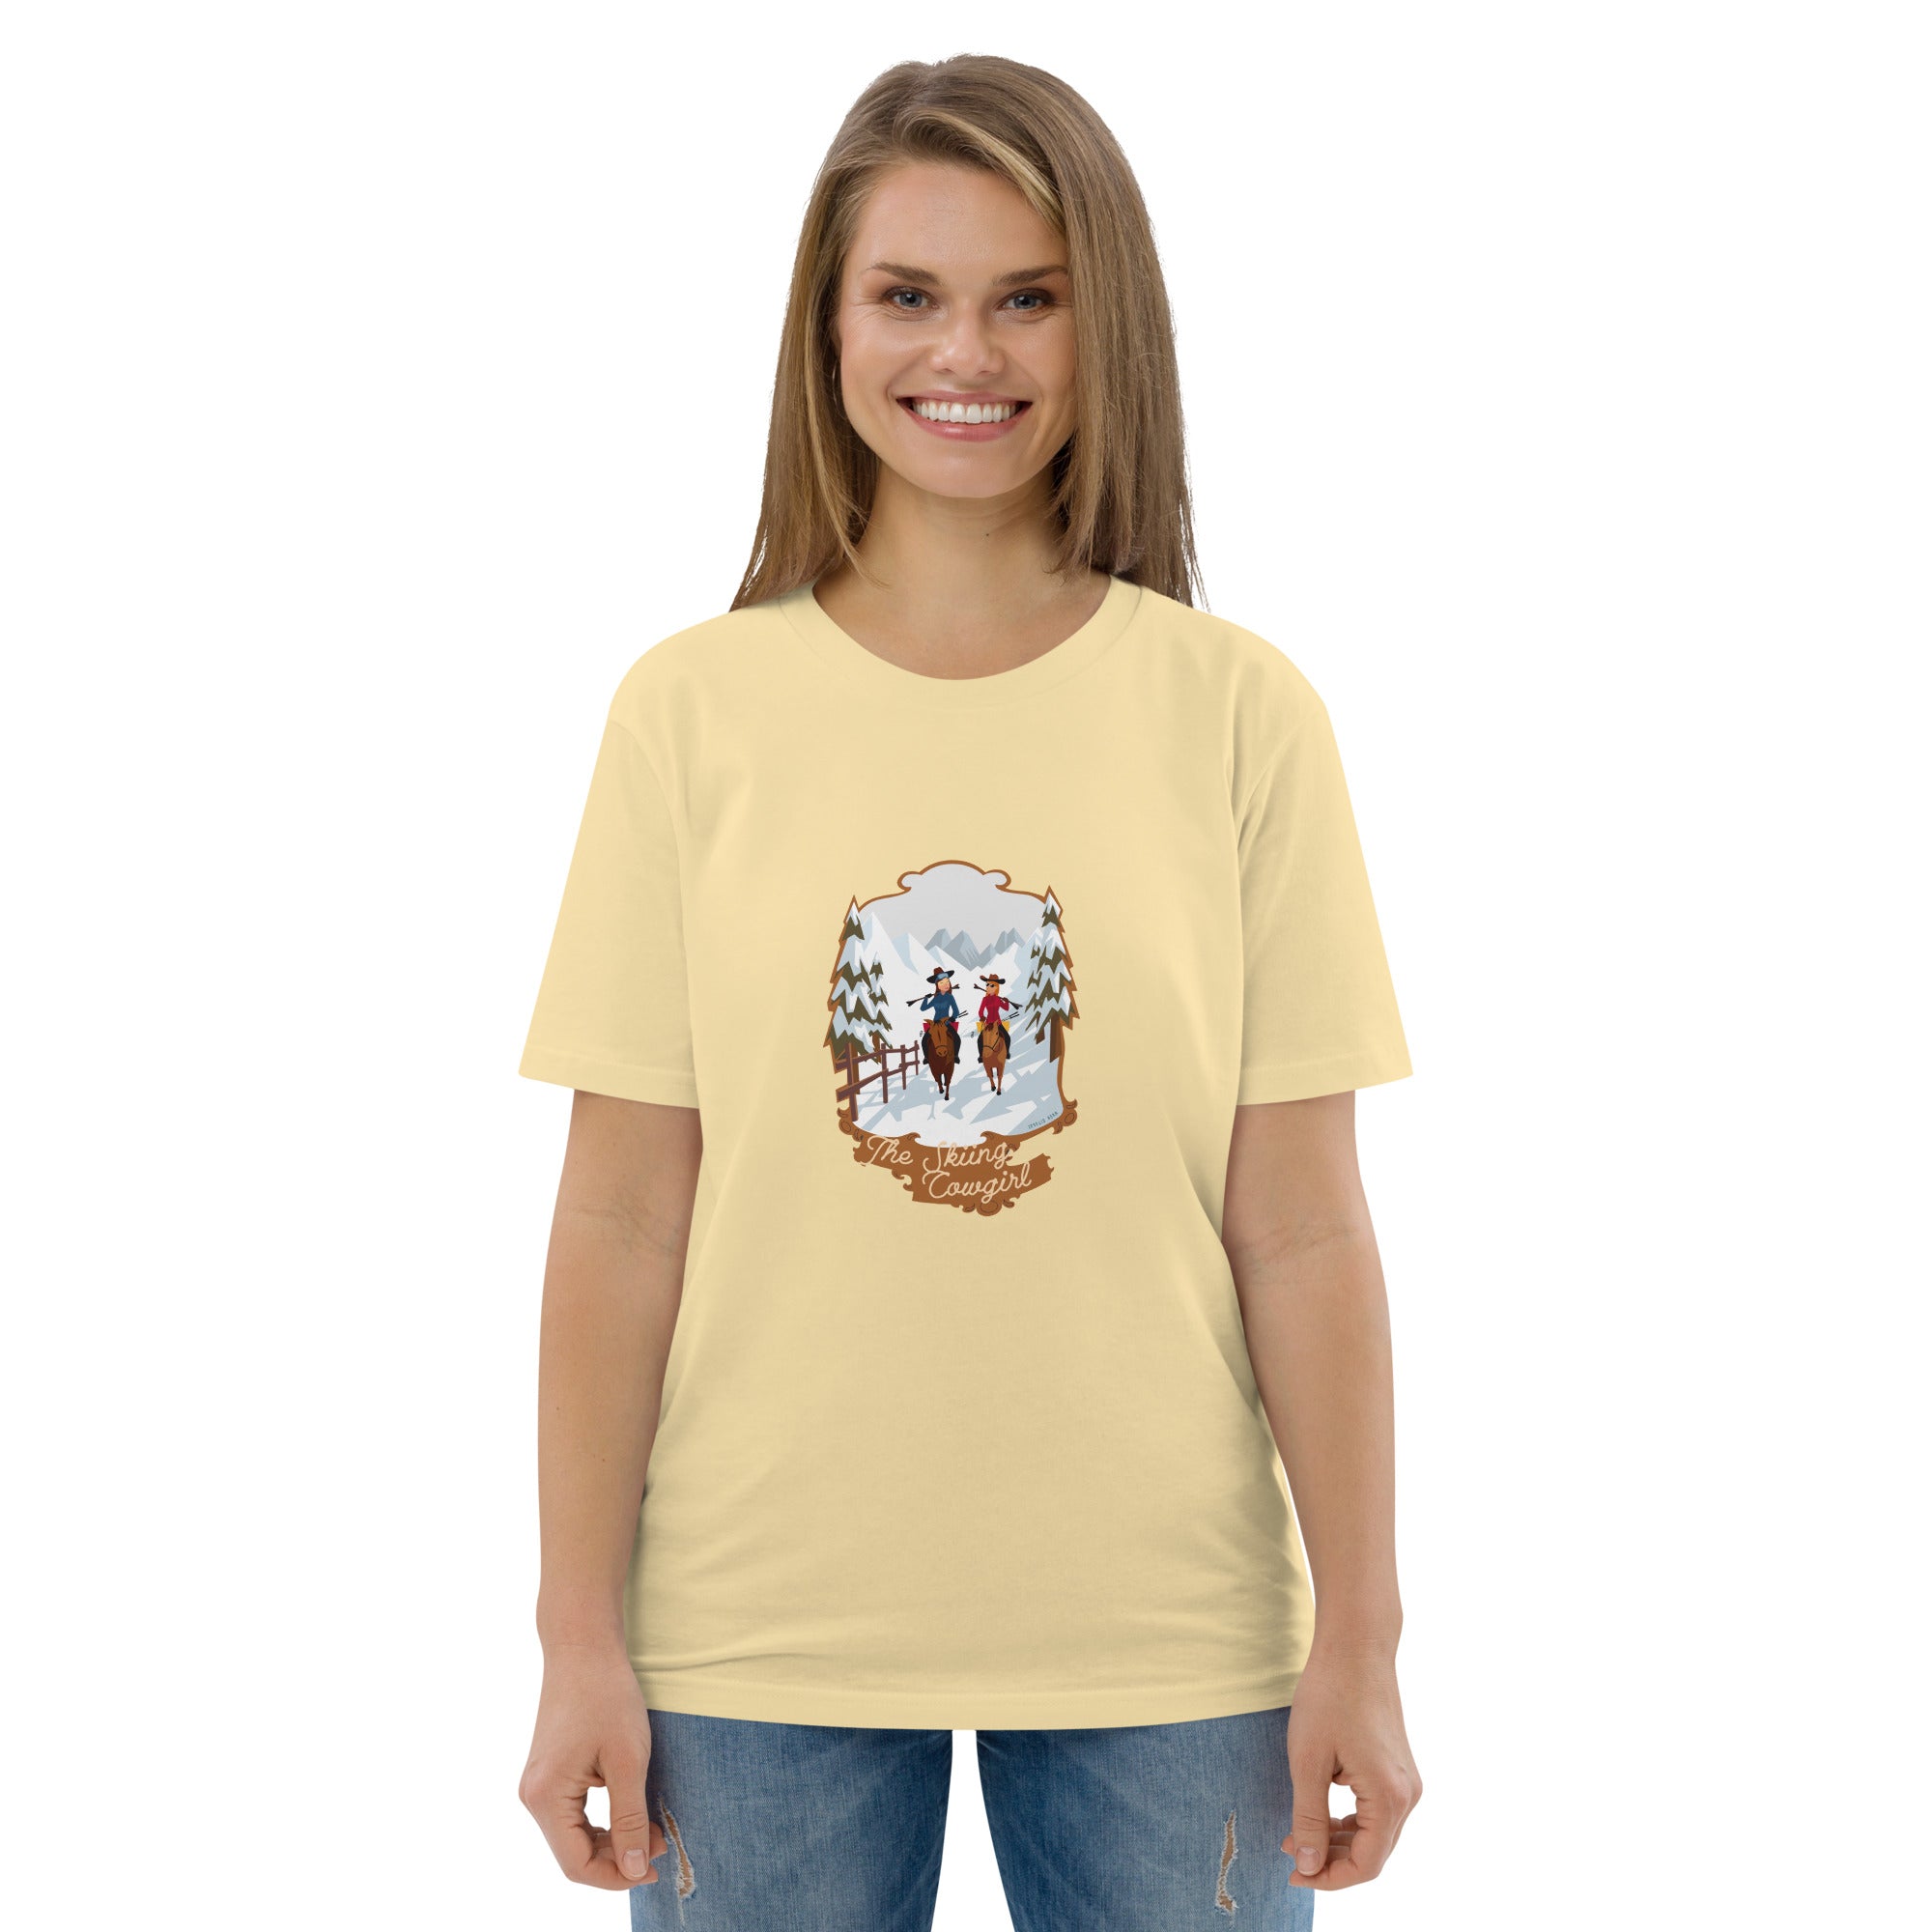 Unisex organic cotton t-shirt The Skiing Cowgirl on bright colors